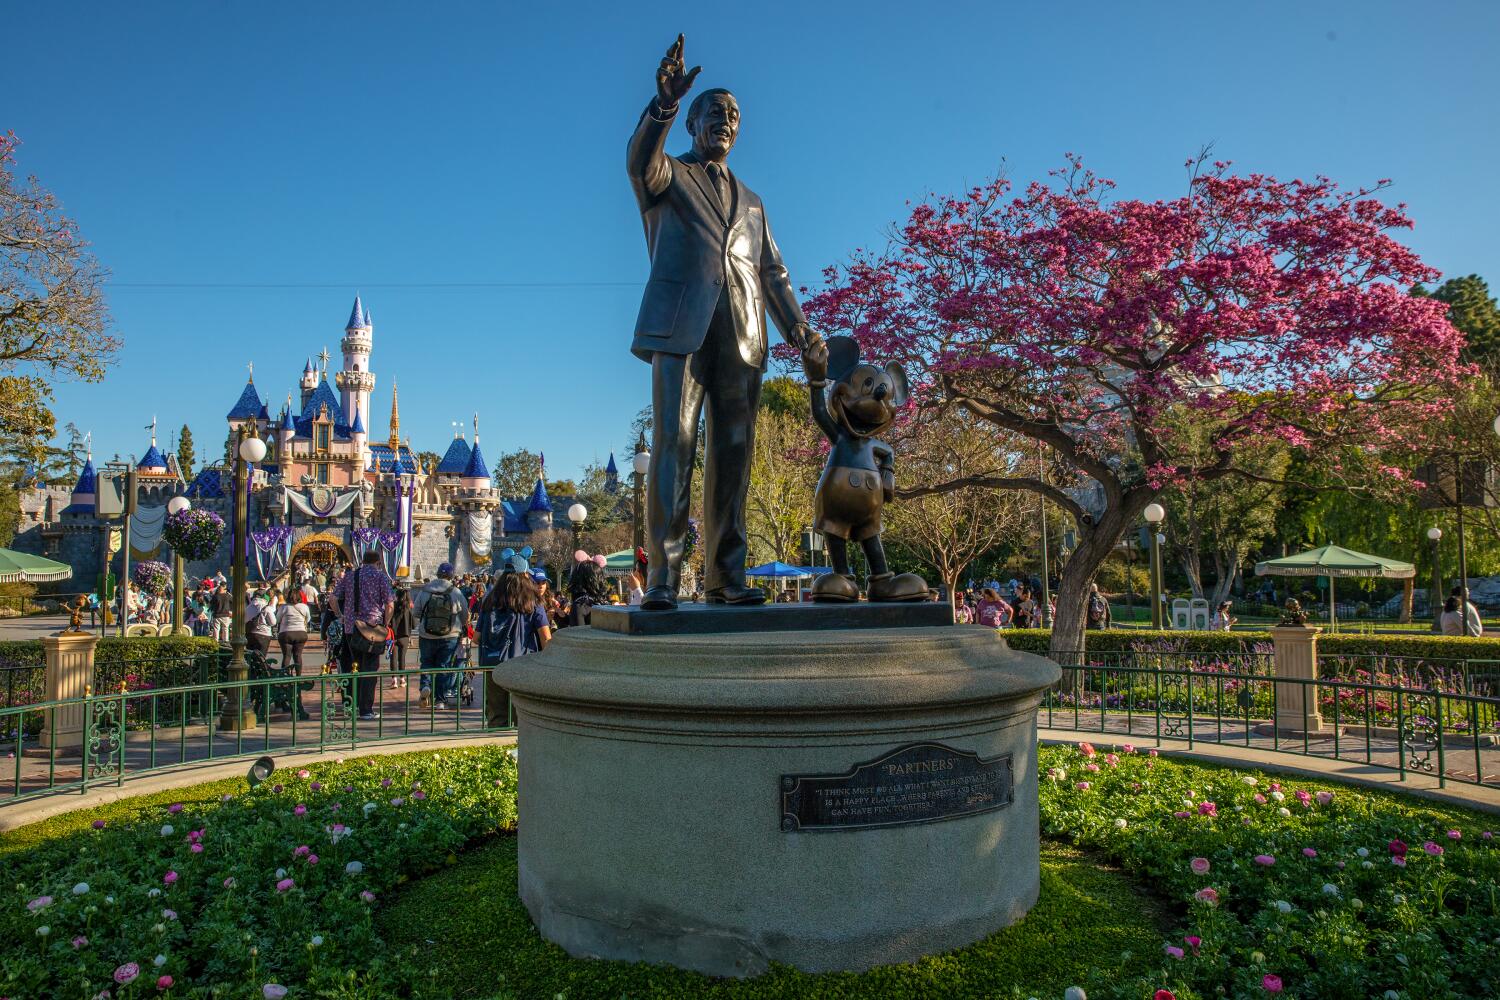 column:-disneyland-has-already-turned-my-hometown-into-a-giant-tourist-trap.-what’s-next?